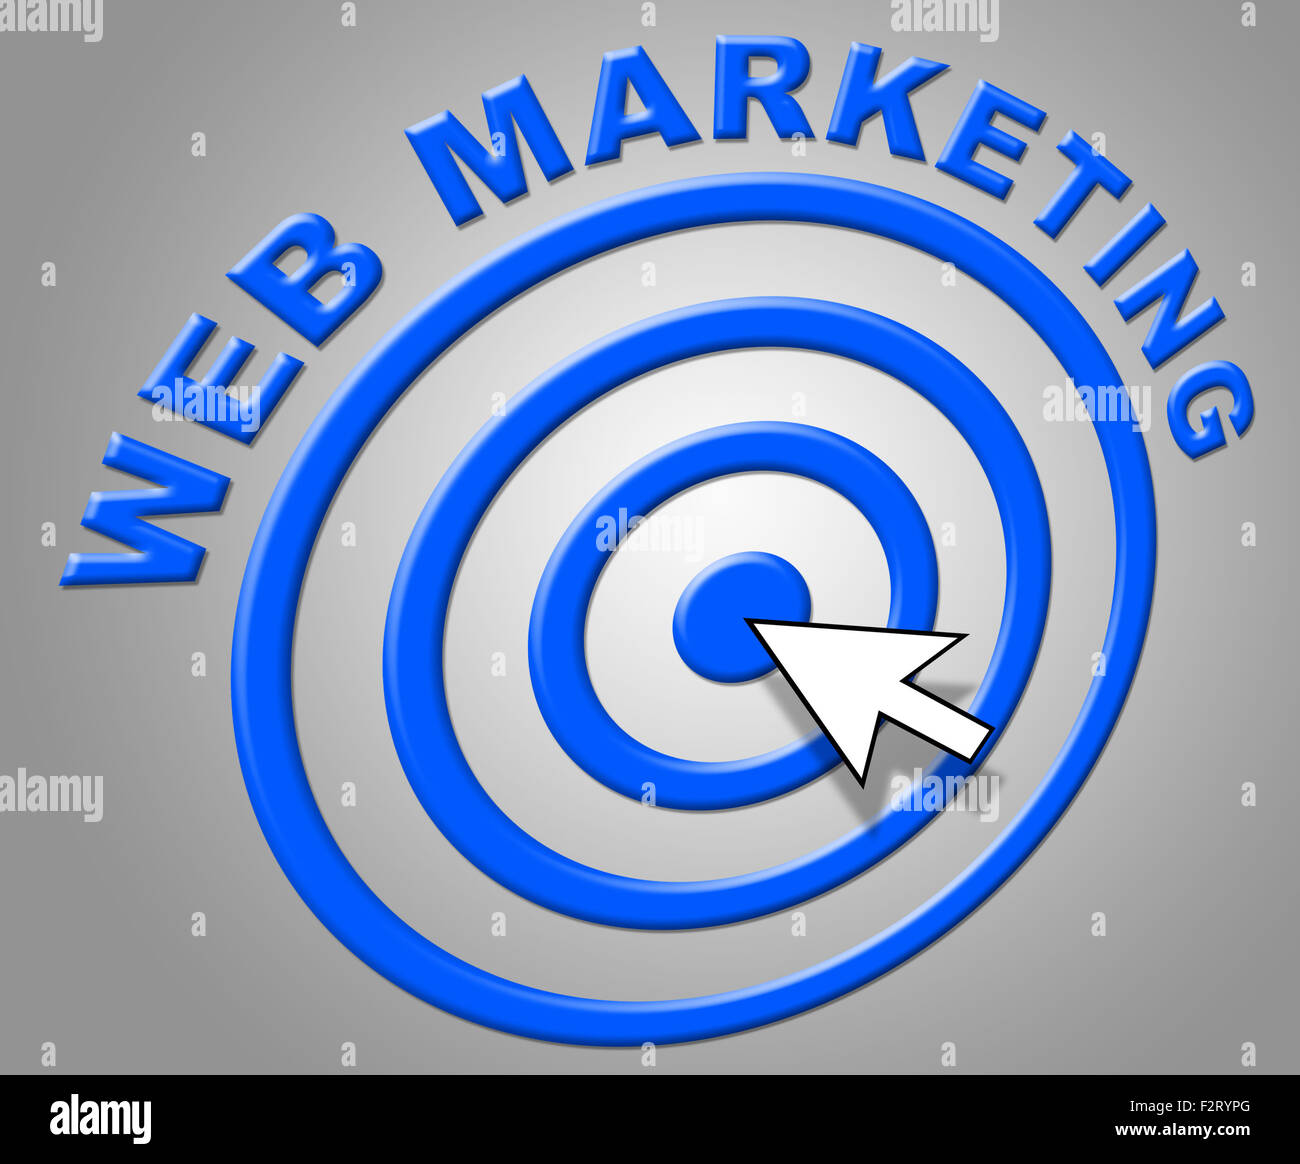 Web Marketing Representing Sales Net And Promotions Stock Photo